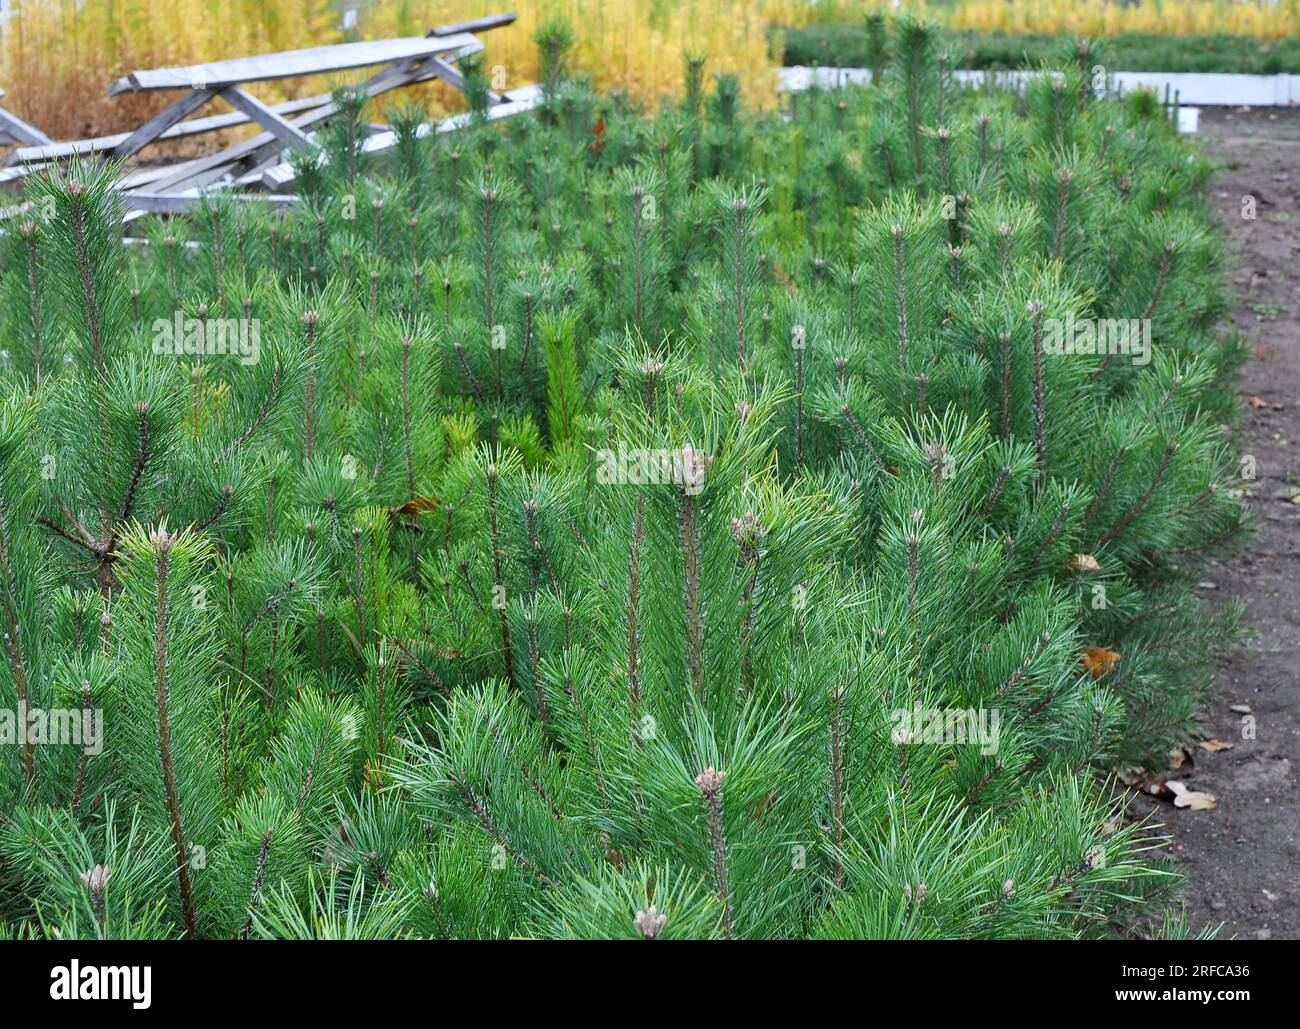 Seedlings of young coniferous trees grown in a nursery in forestry Stock Photo